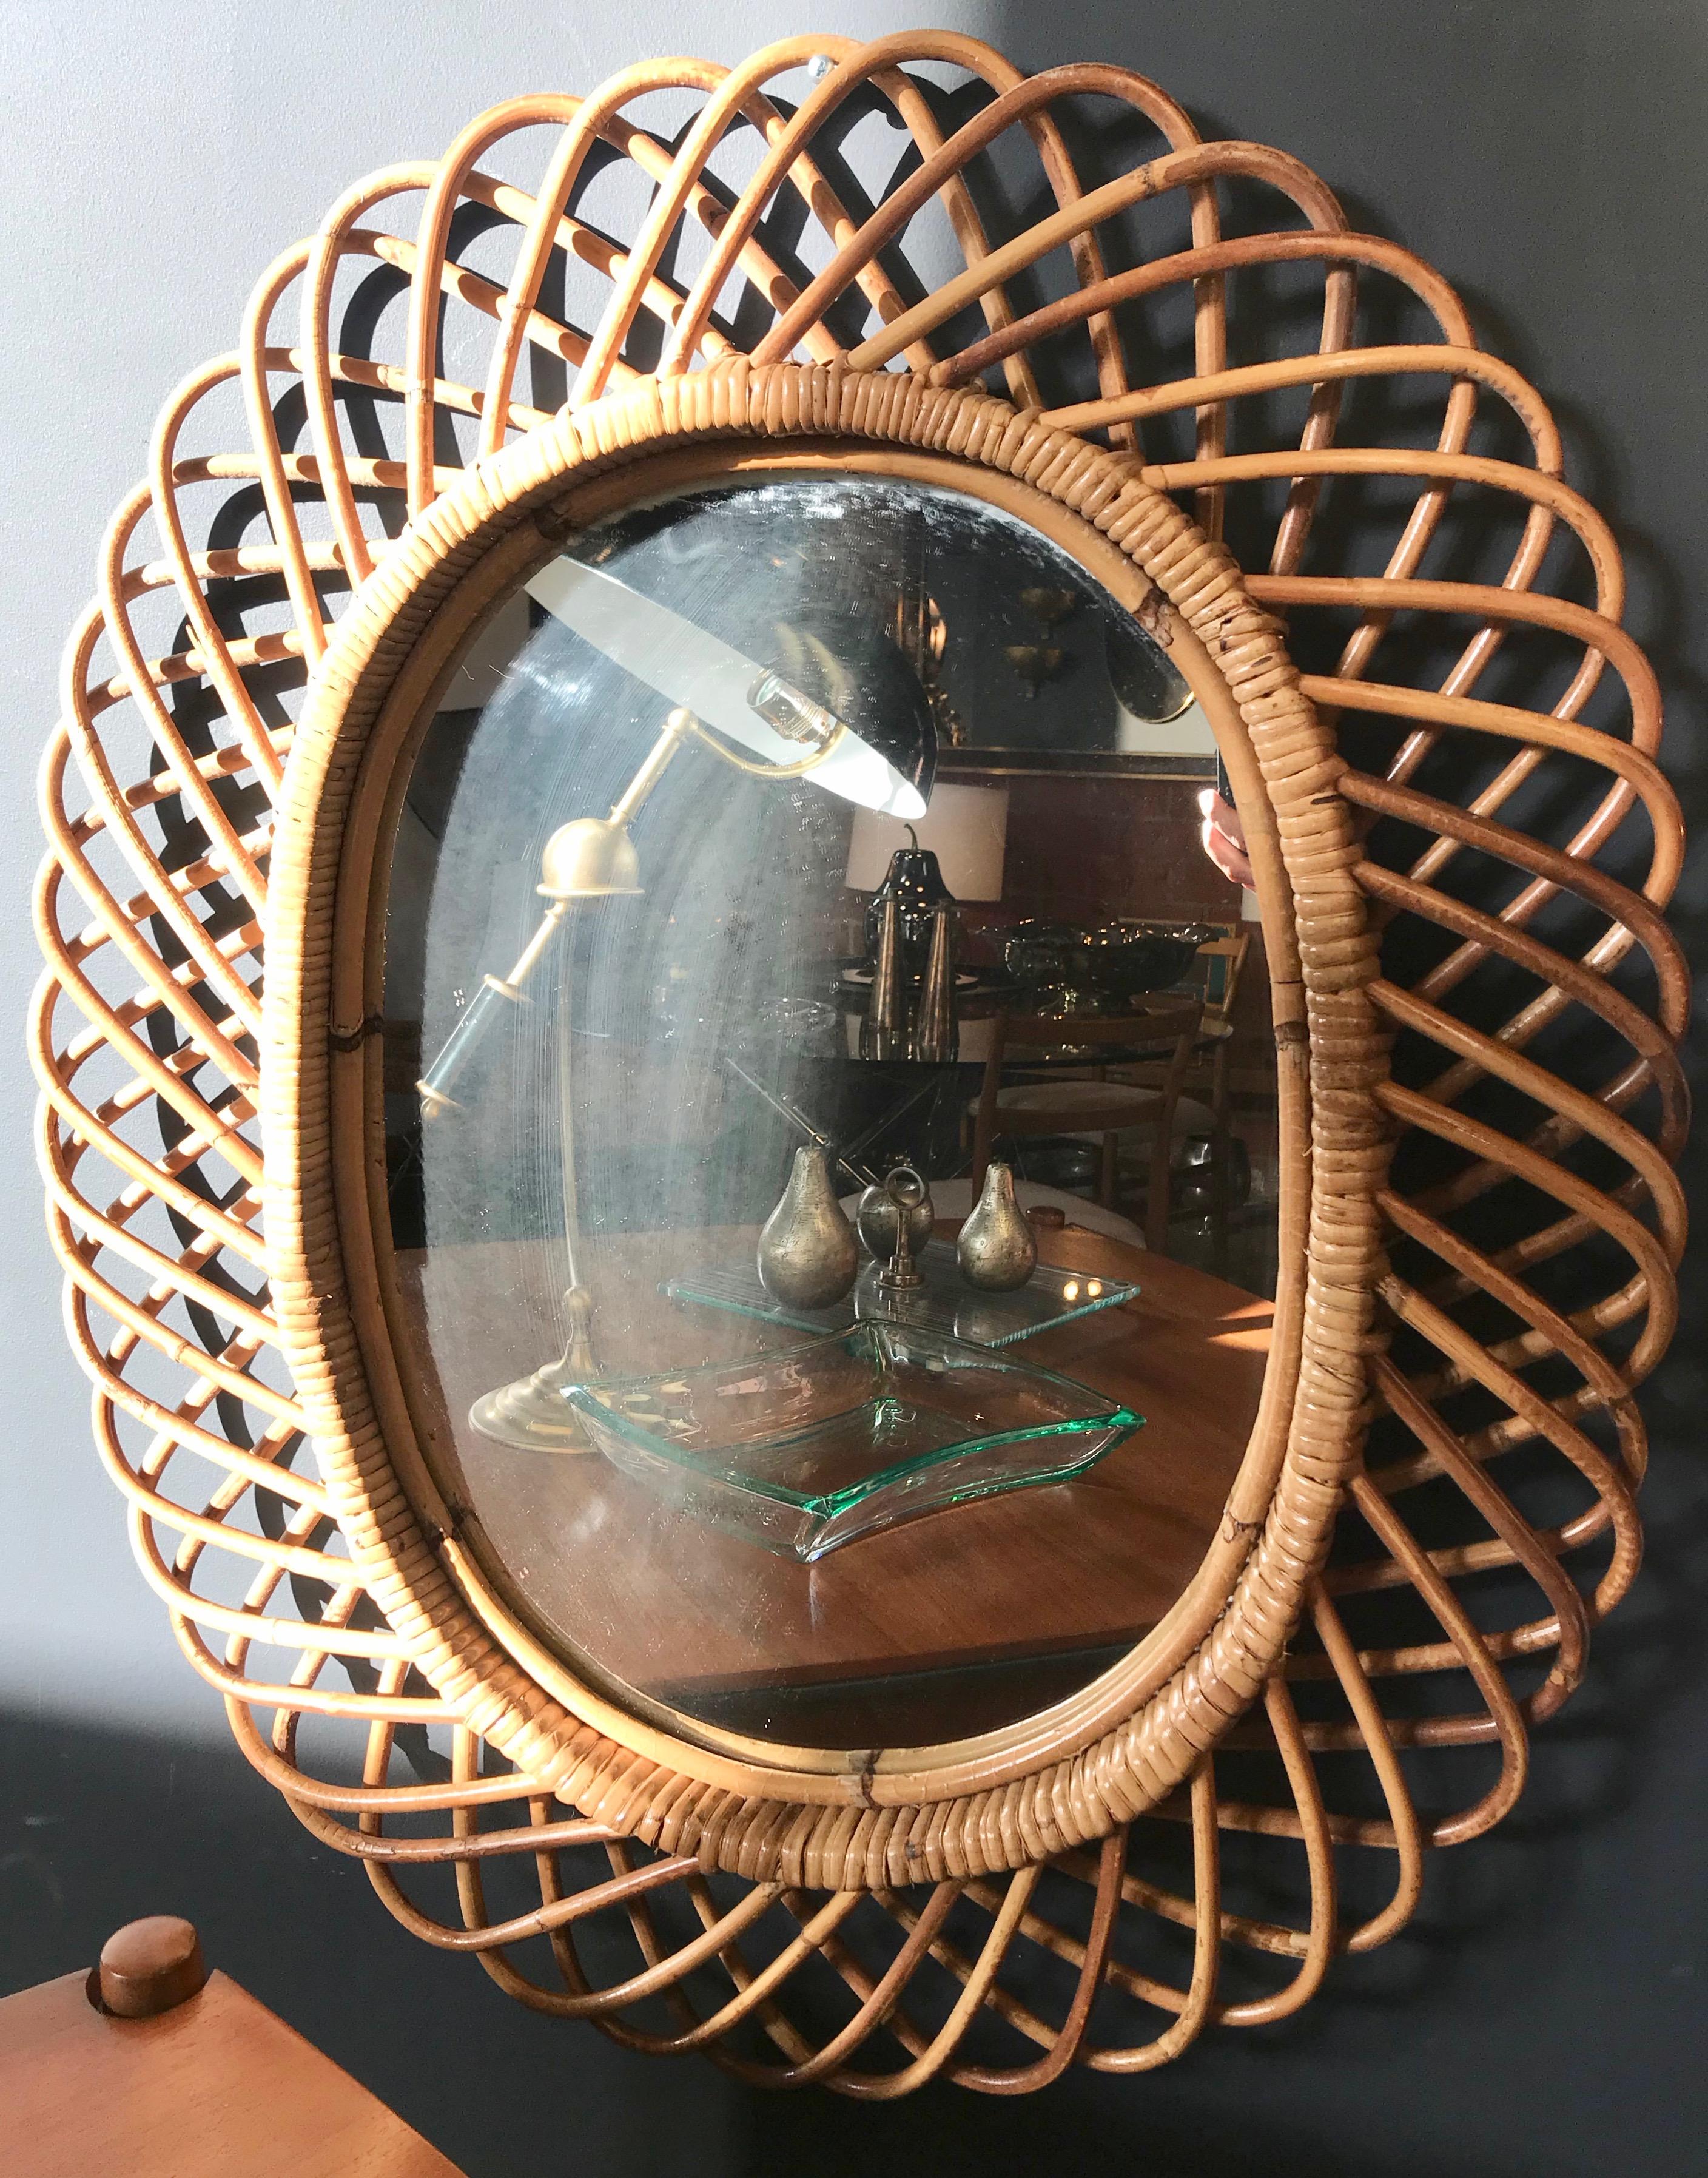 Italian rattan oval wall mirror (circa 1960s) in the style of Franco Albini. This mirror has a complex weave of rattan in a series of horseshoe-shaped projections on the frame edge. There is a graceful, aged patina on the mirror frame and the glass